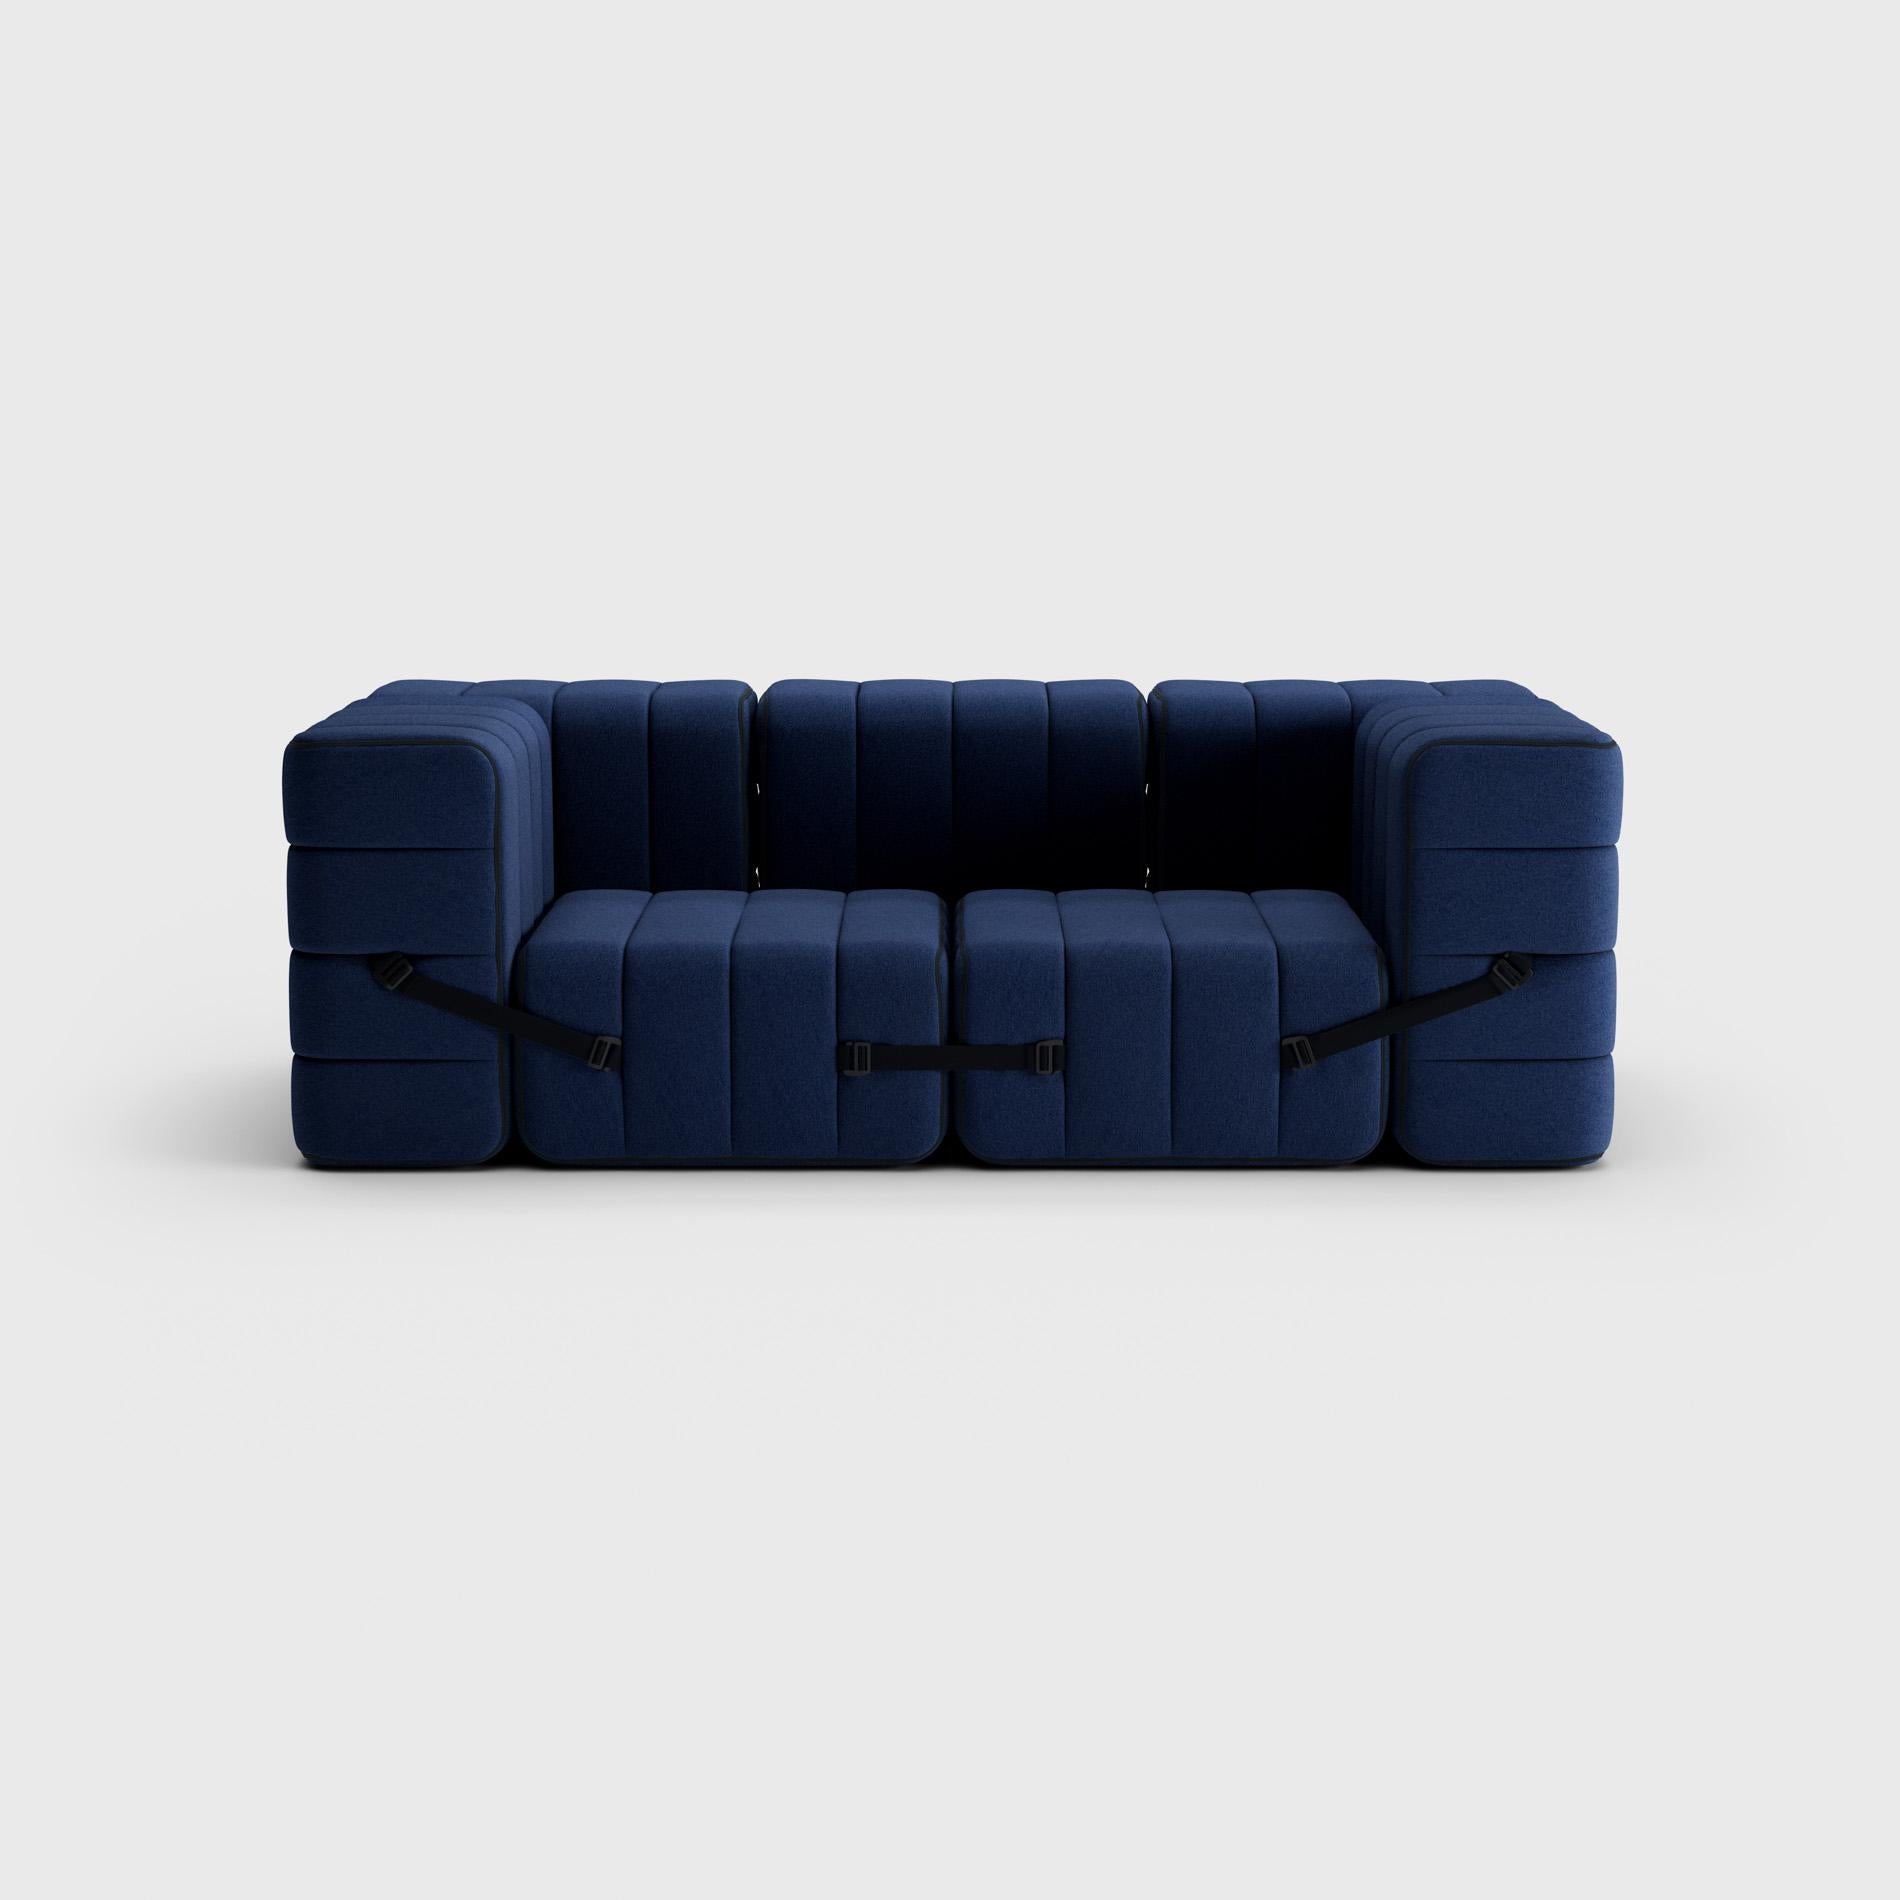 Curt Single Module – Fabric Jet '6098 Dark Blue' – Curt Modular Sofa System In New Condition For Sale In Berlin, BE